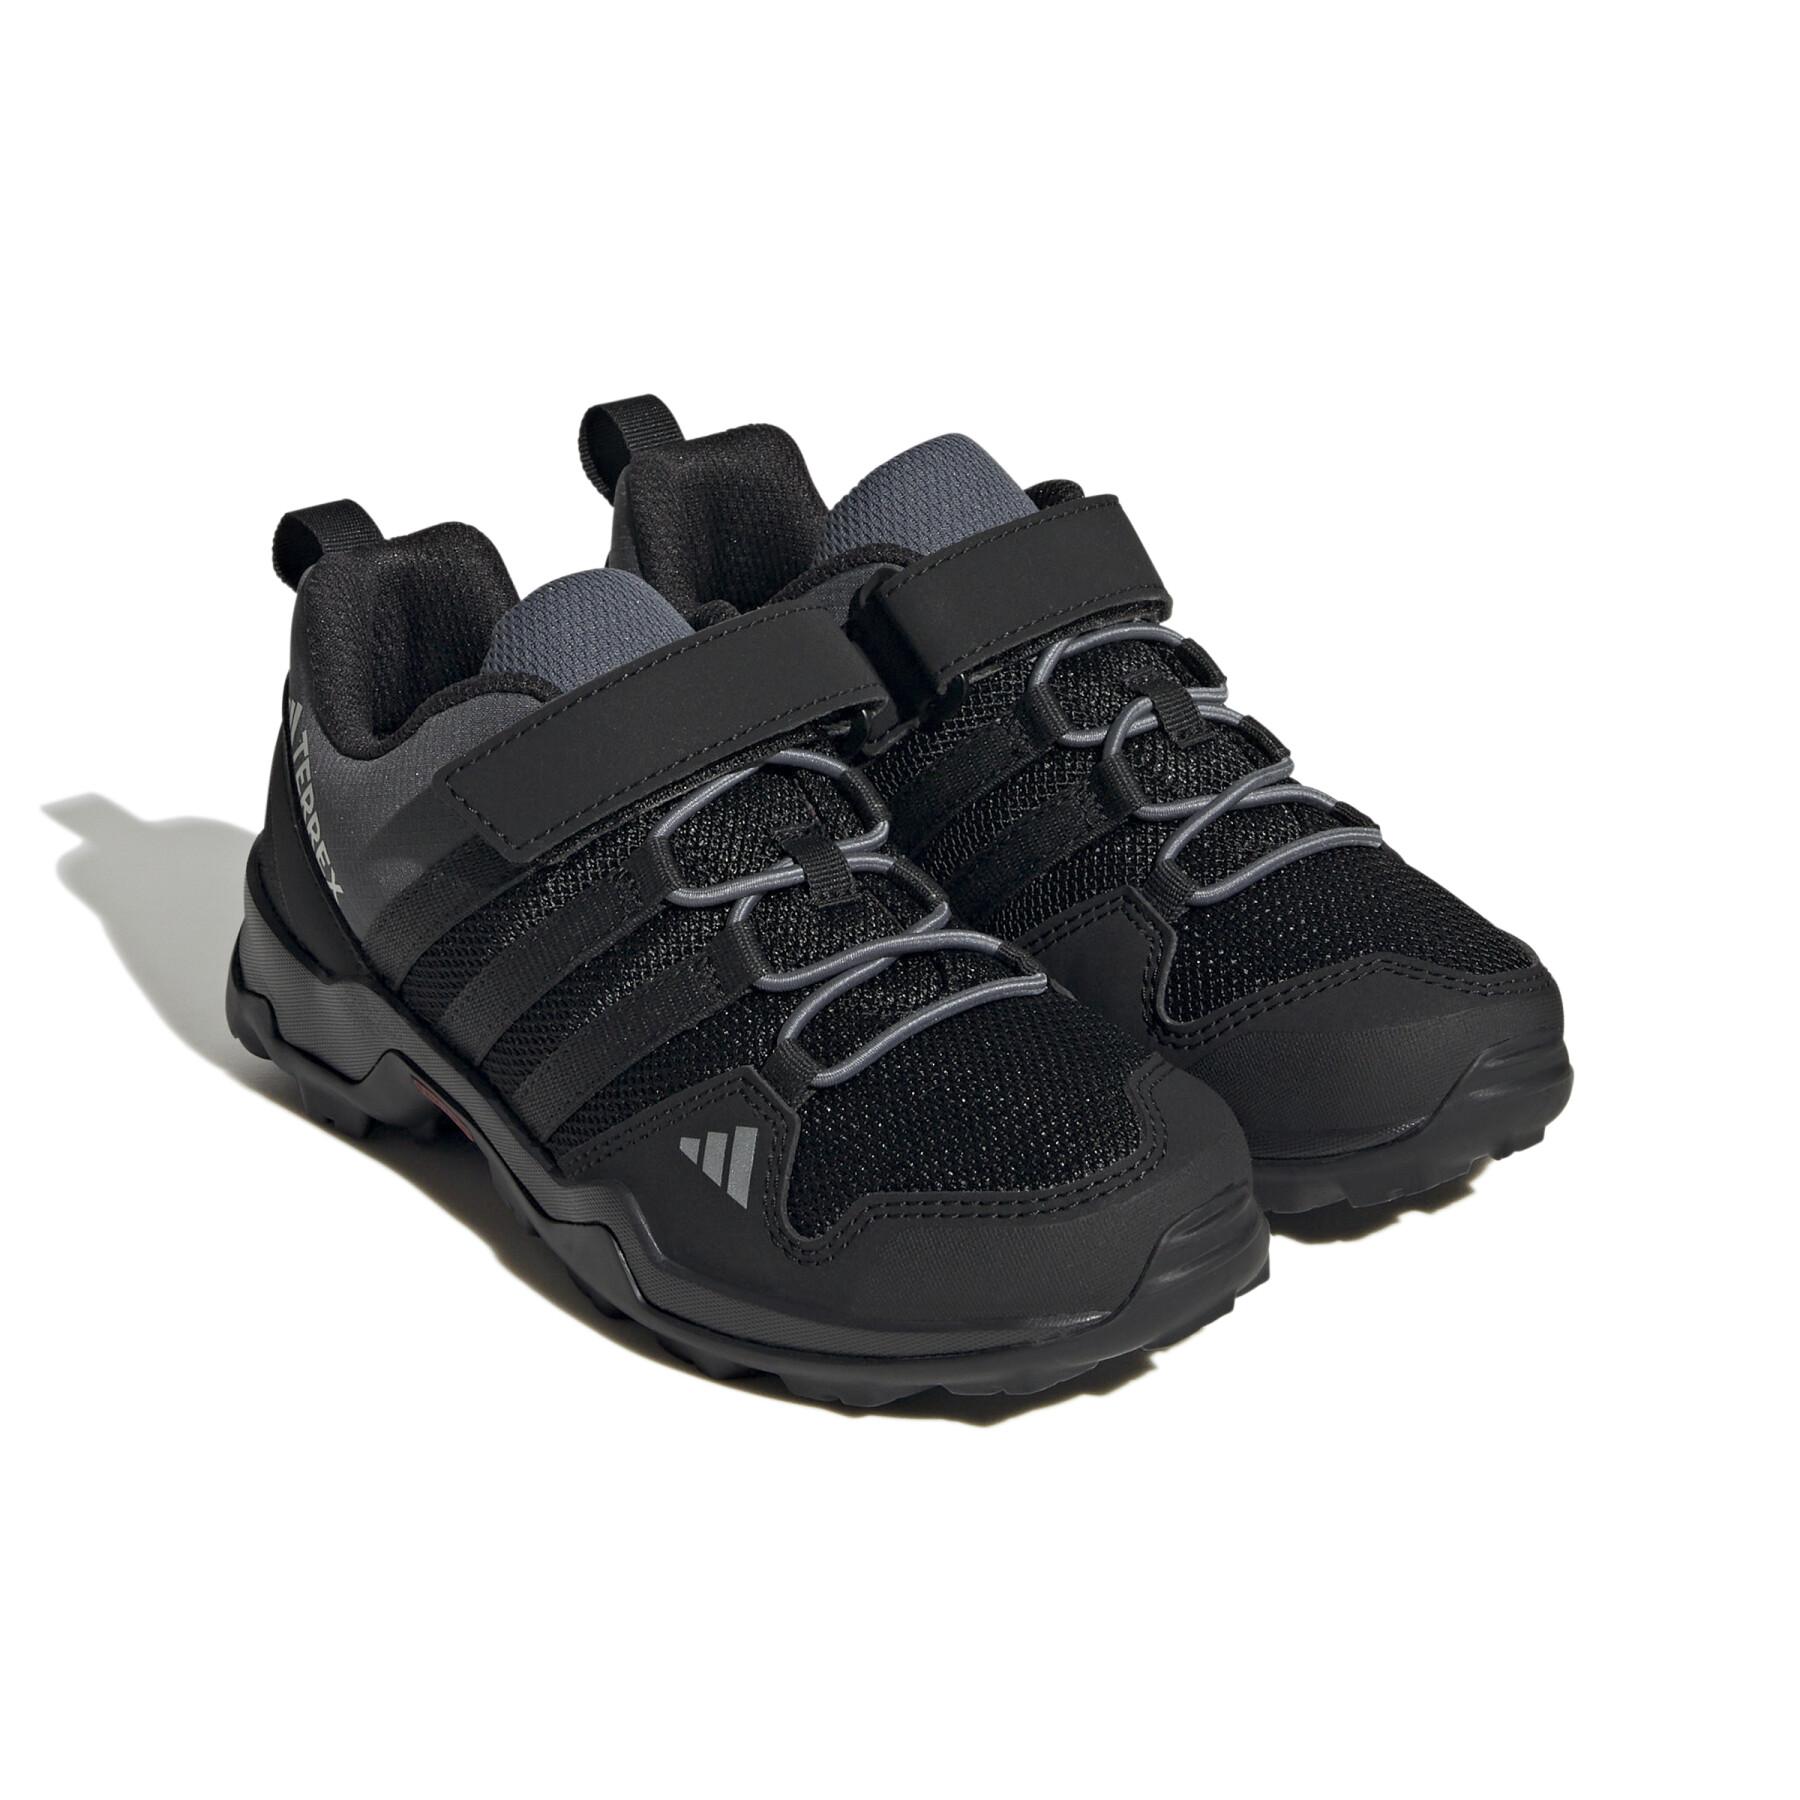 Children's hook-and-loop hiking boots adidas Terrex AX2R